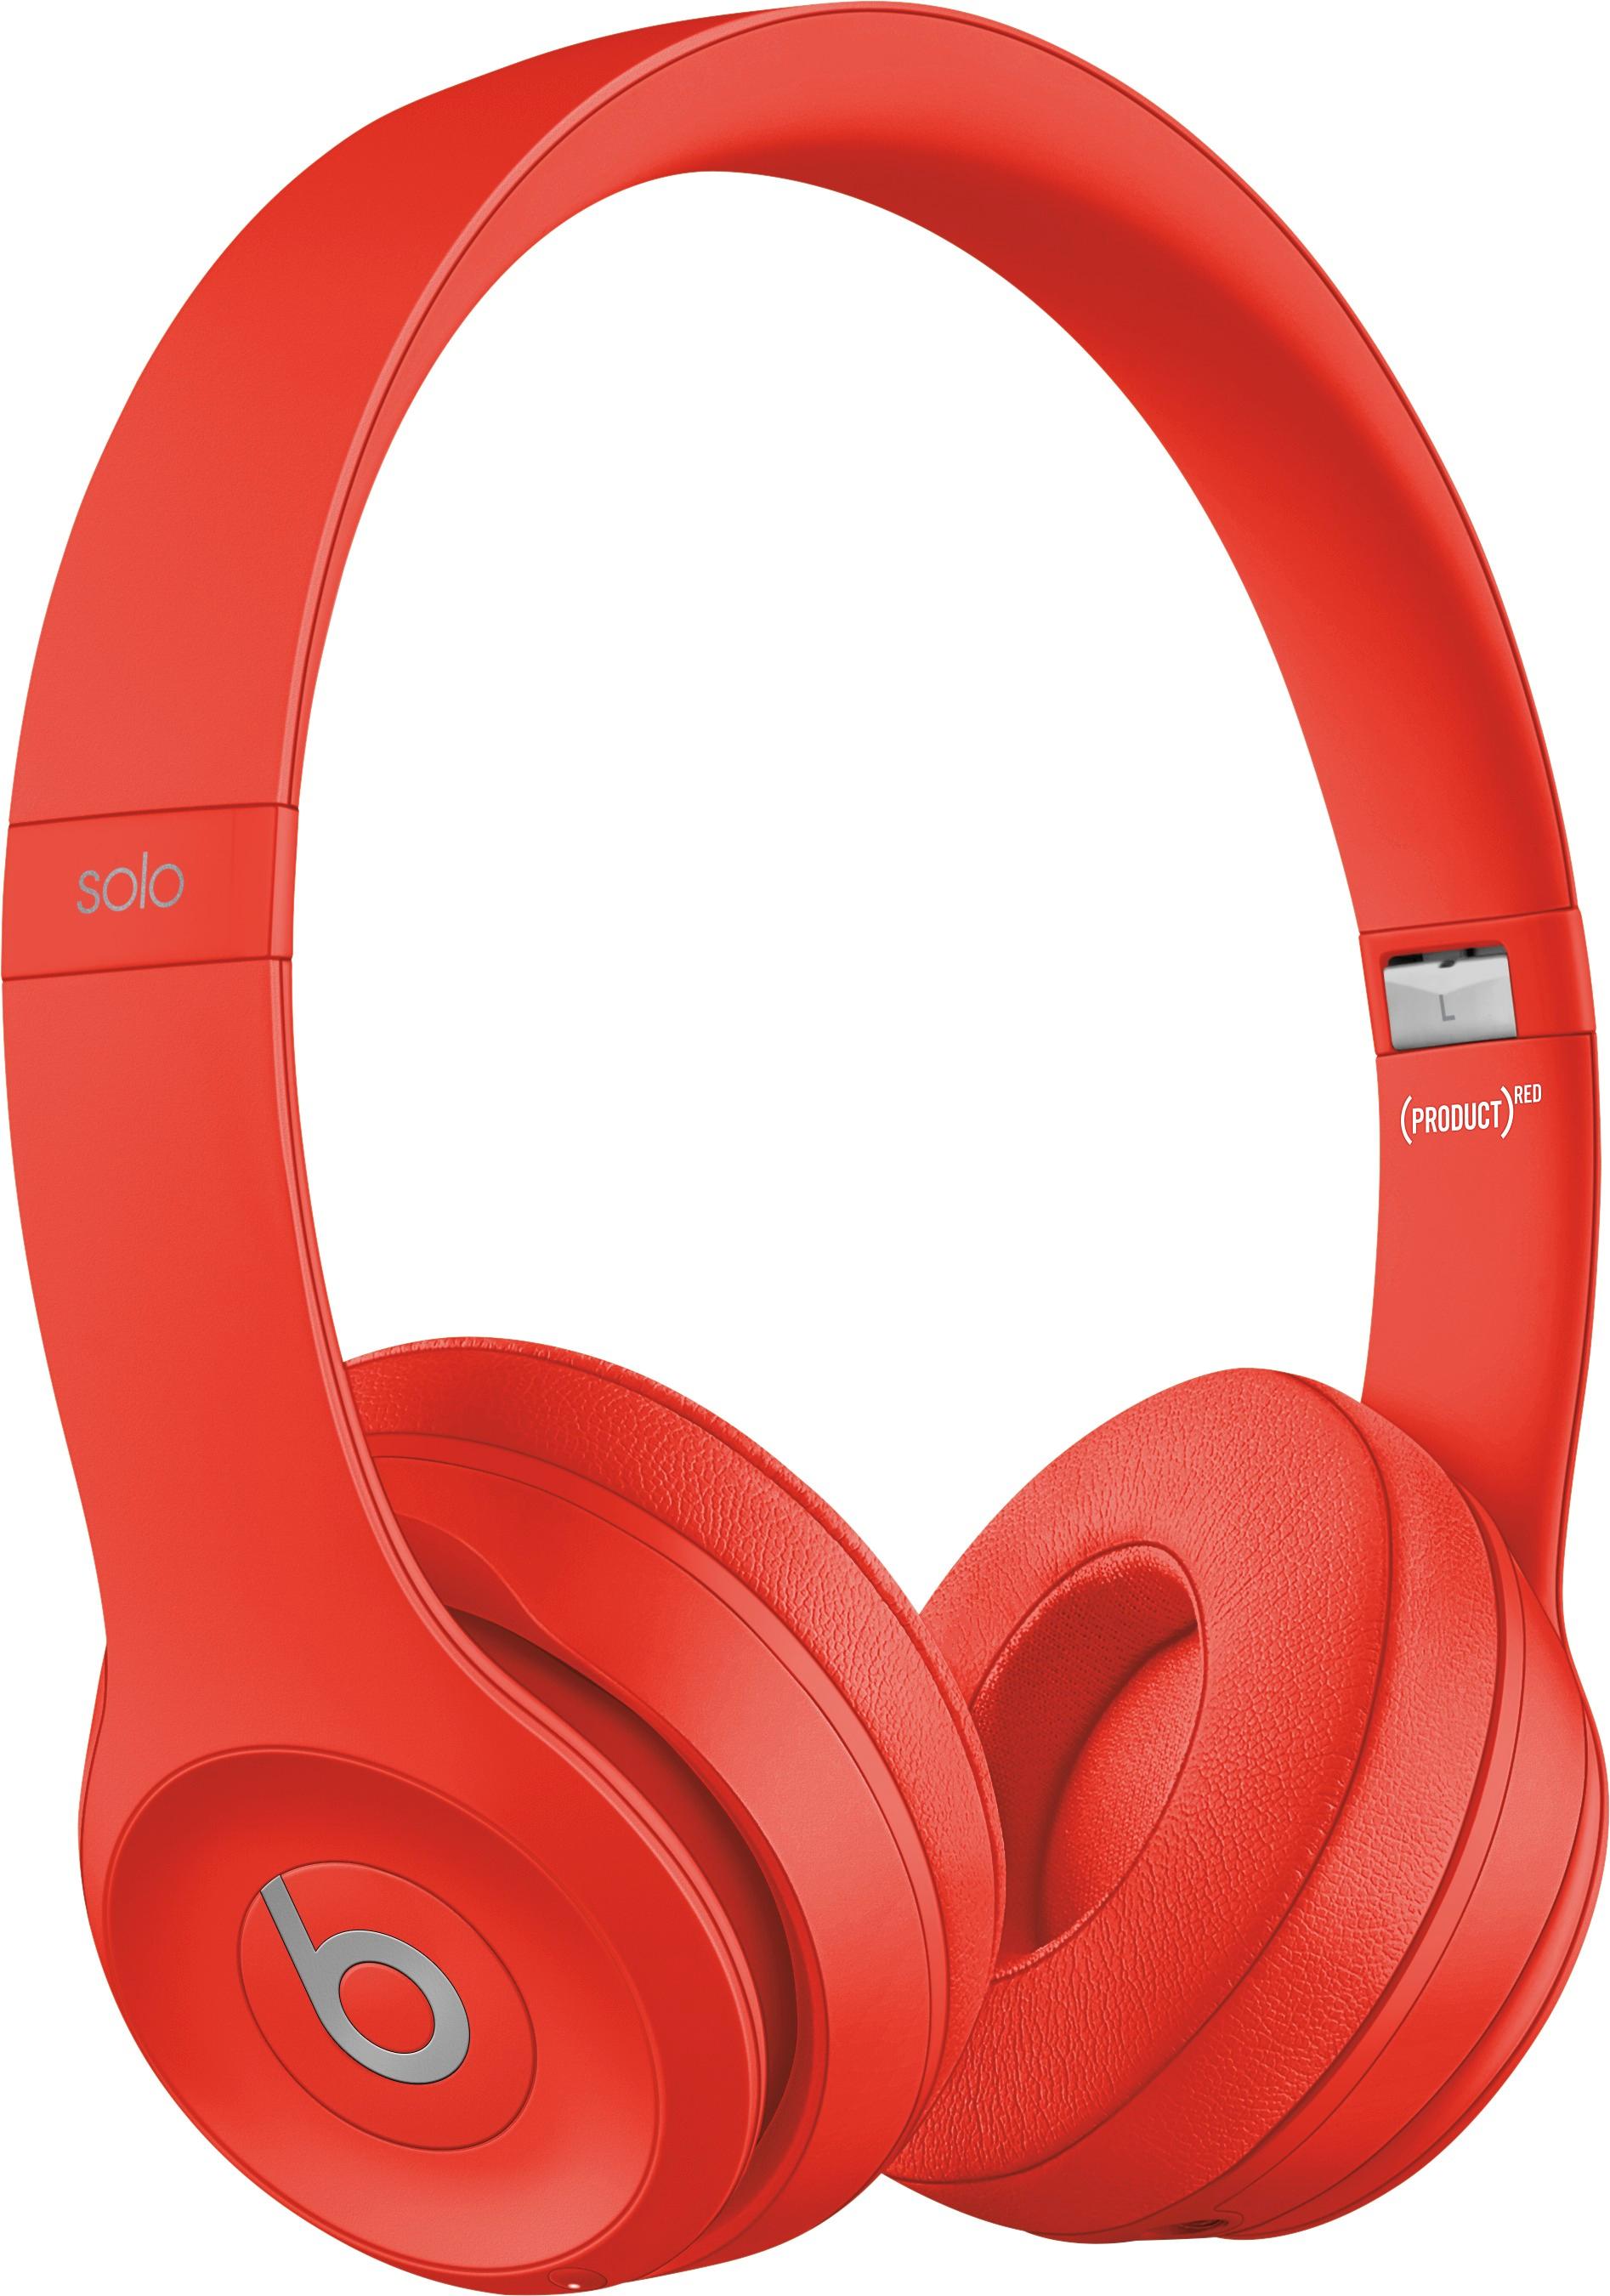 Beats by Dr. Dre Solo3 Wireless Headphones MP162LL/A (PRODUCT)RED - JP